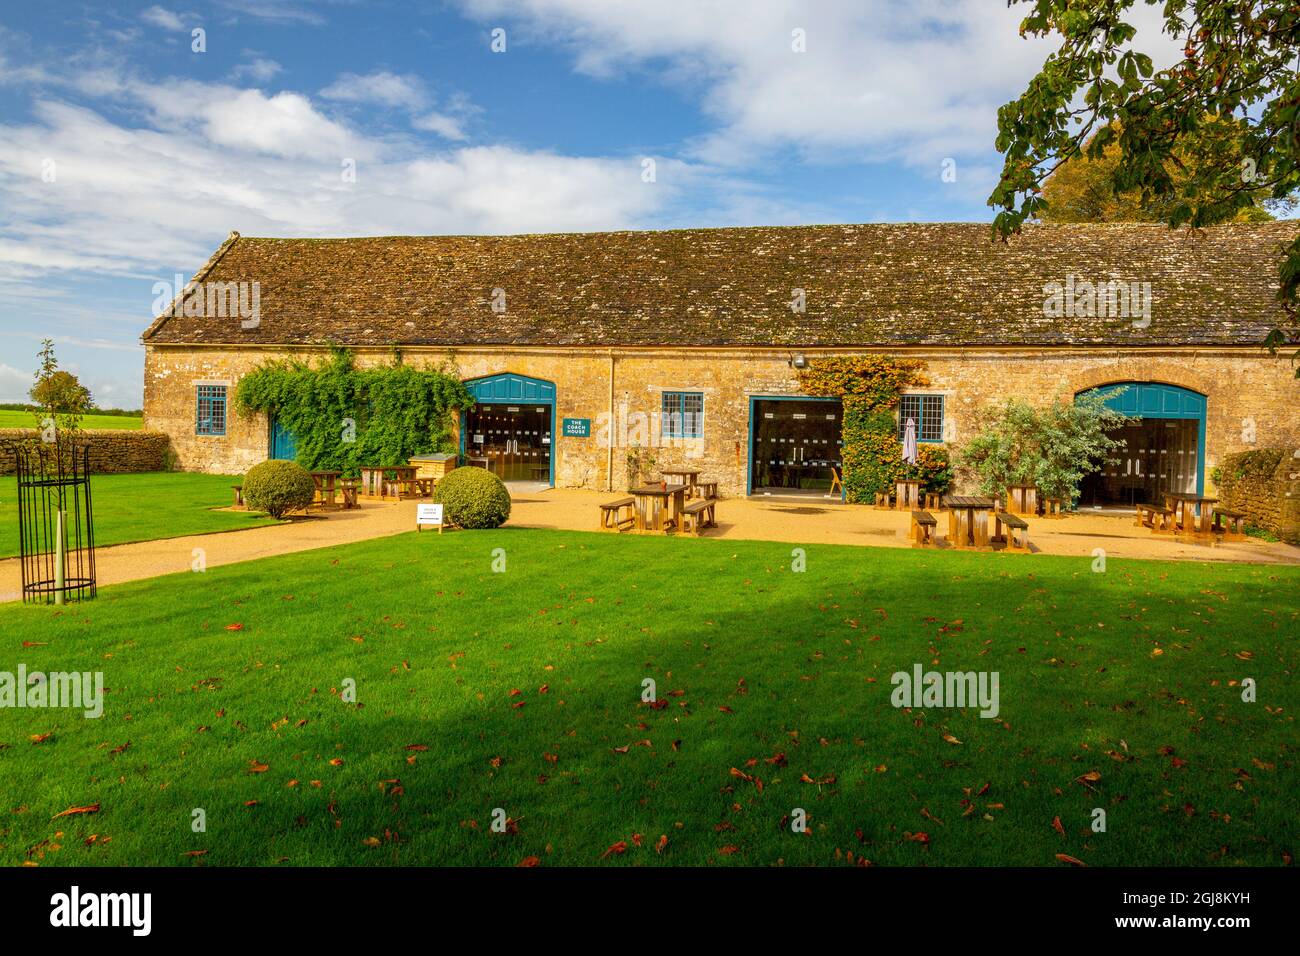 The Coach House cafe occupies an historic restored out-building at Mapperton House, Dorset, England, UK Stock Photo